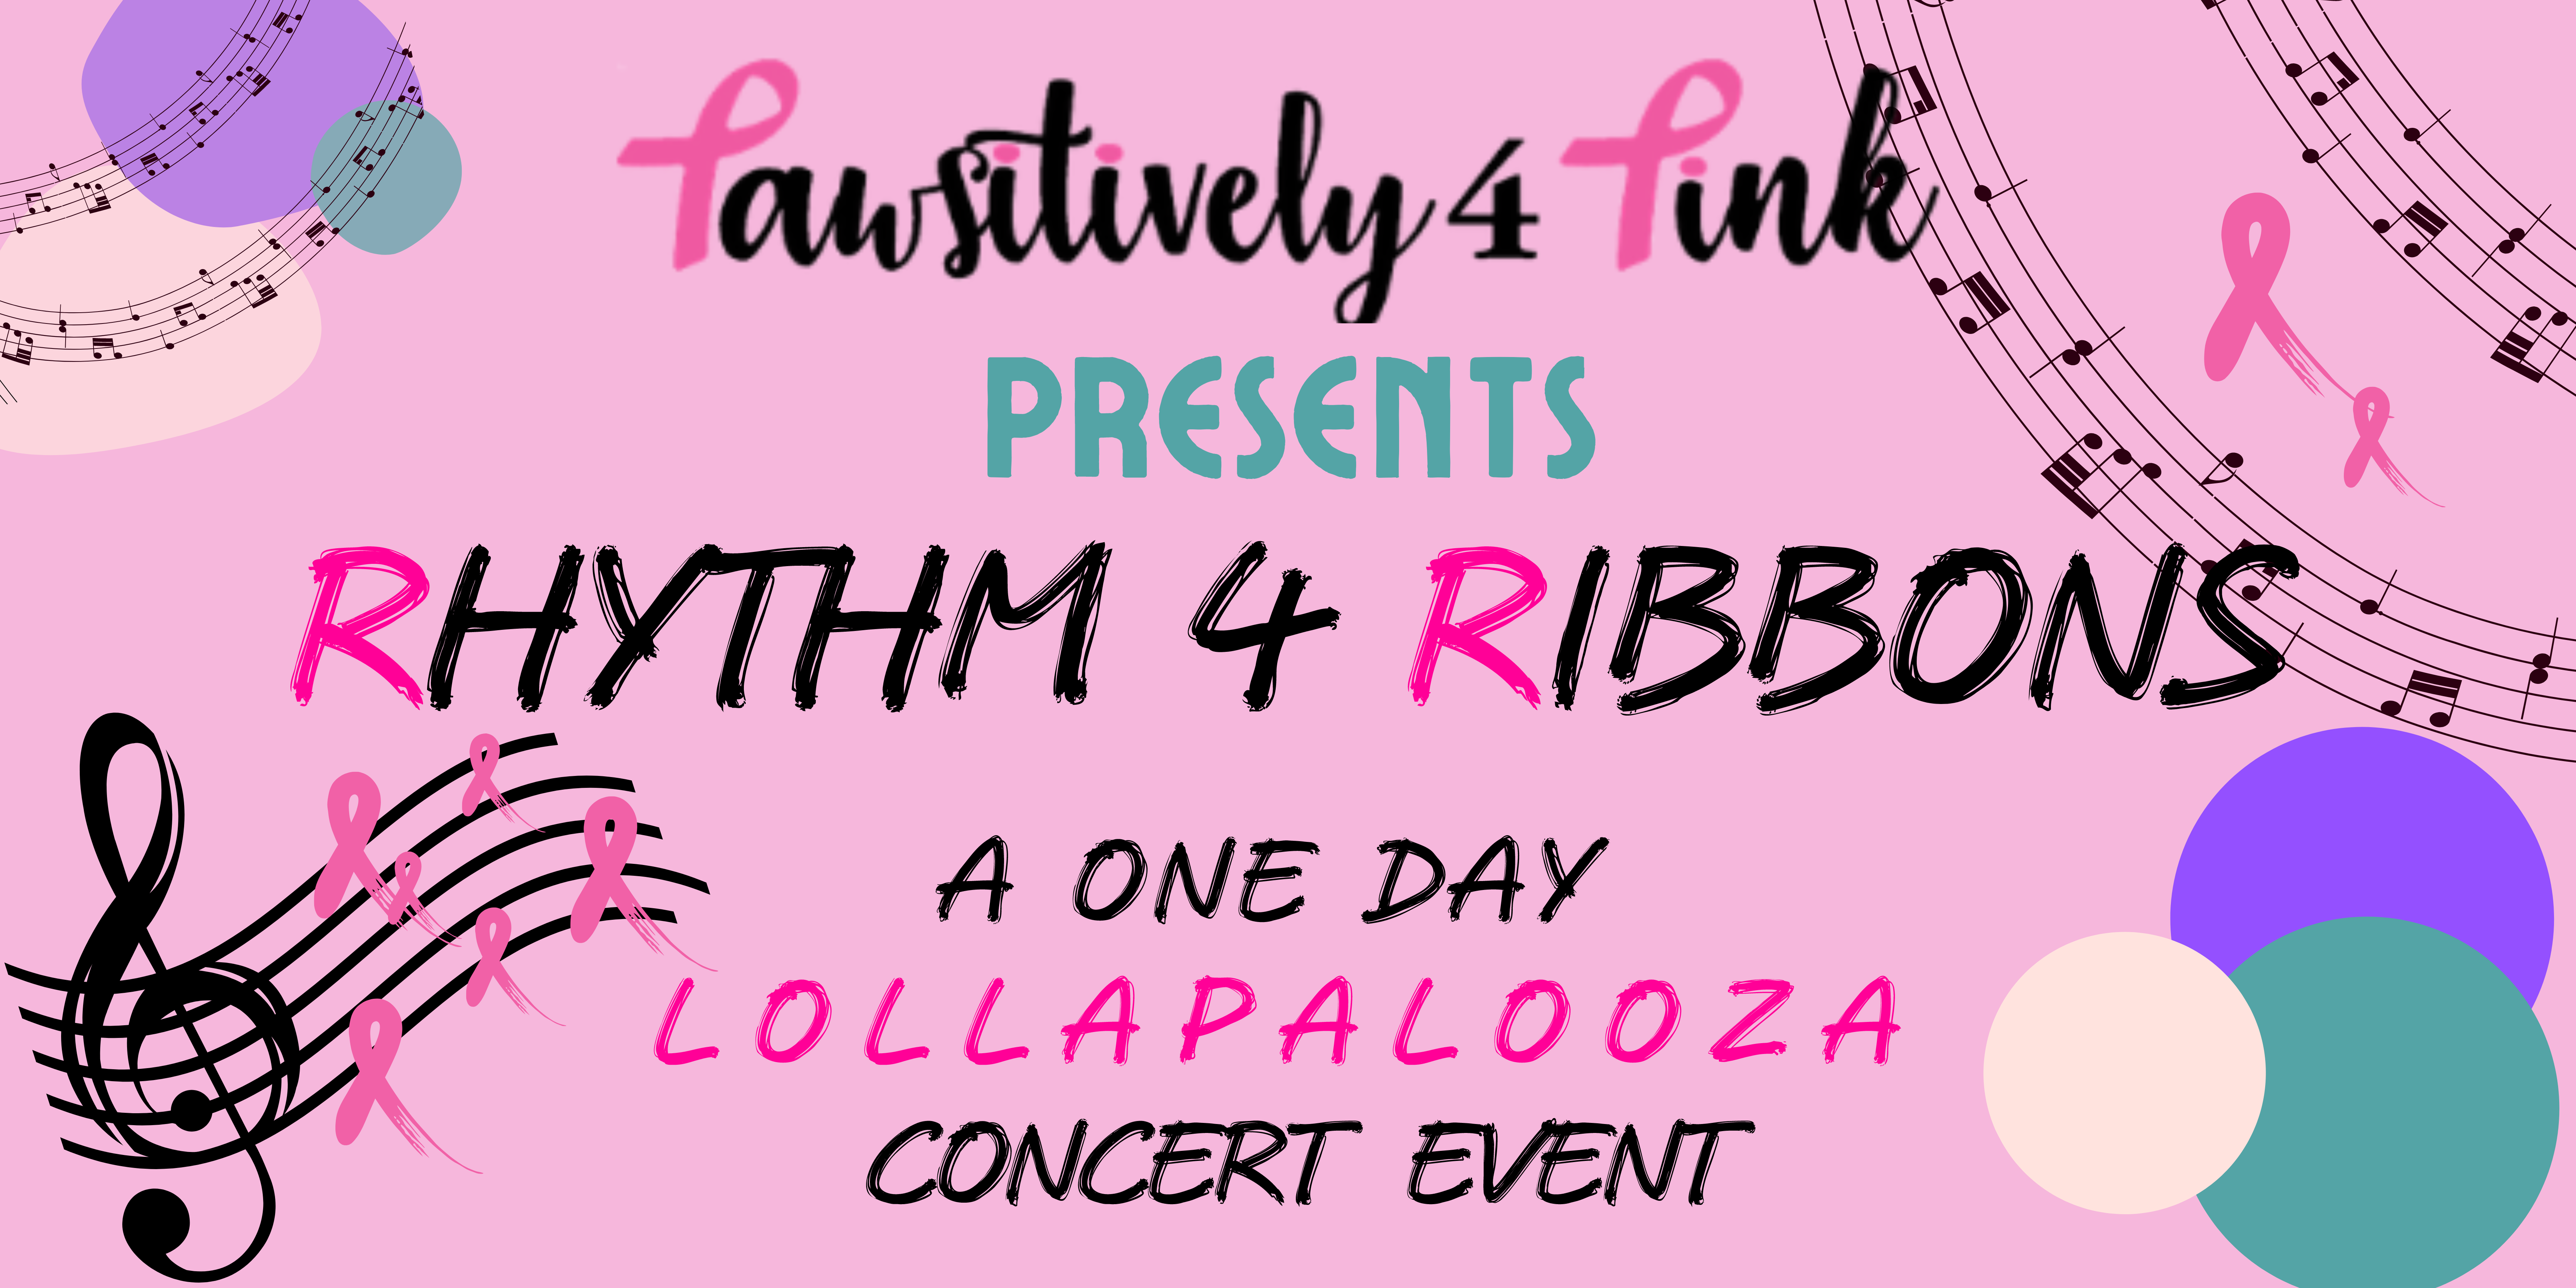 Pawsitively 4 Pink to Hold Rhythm 4 Ribbons One Day Lollapalooza Concert Event